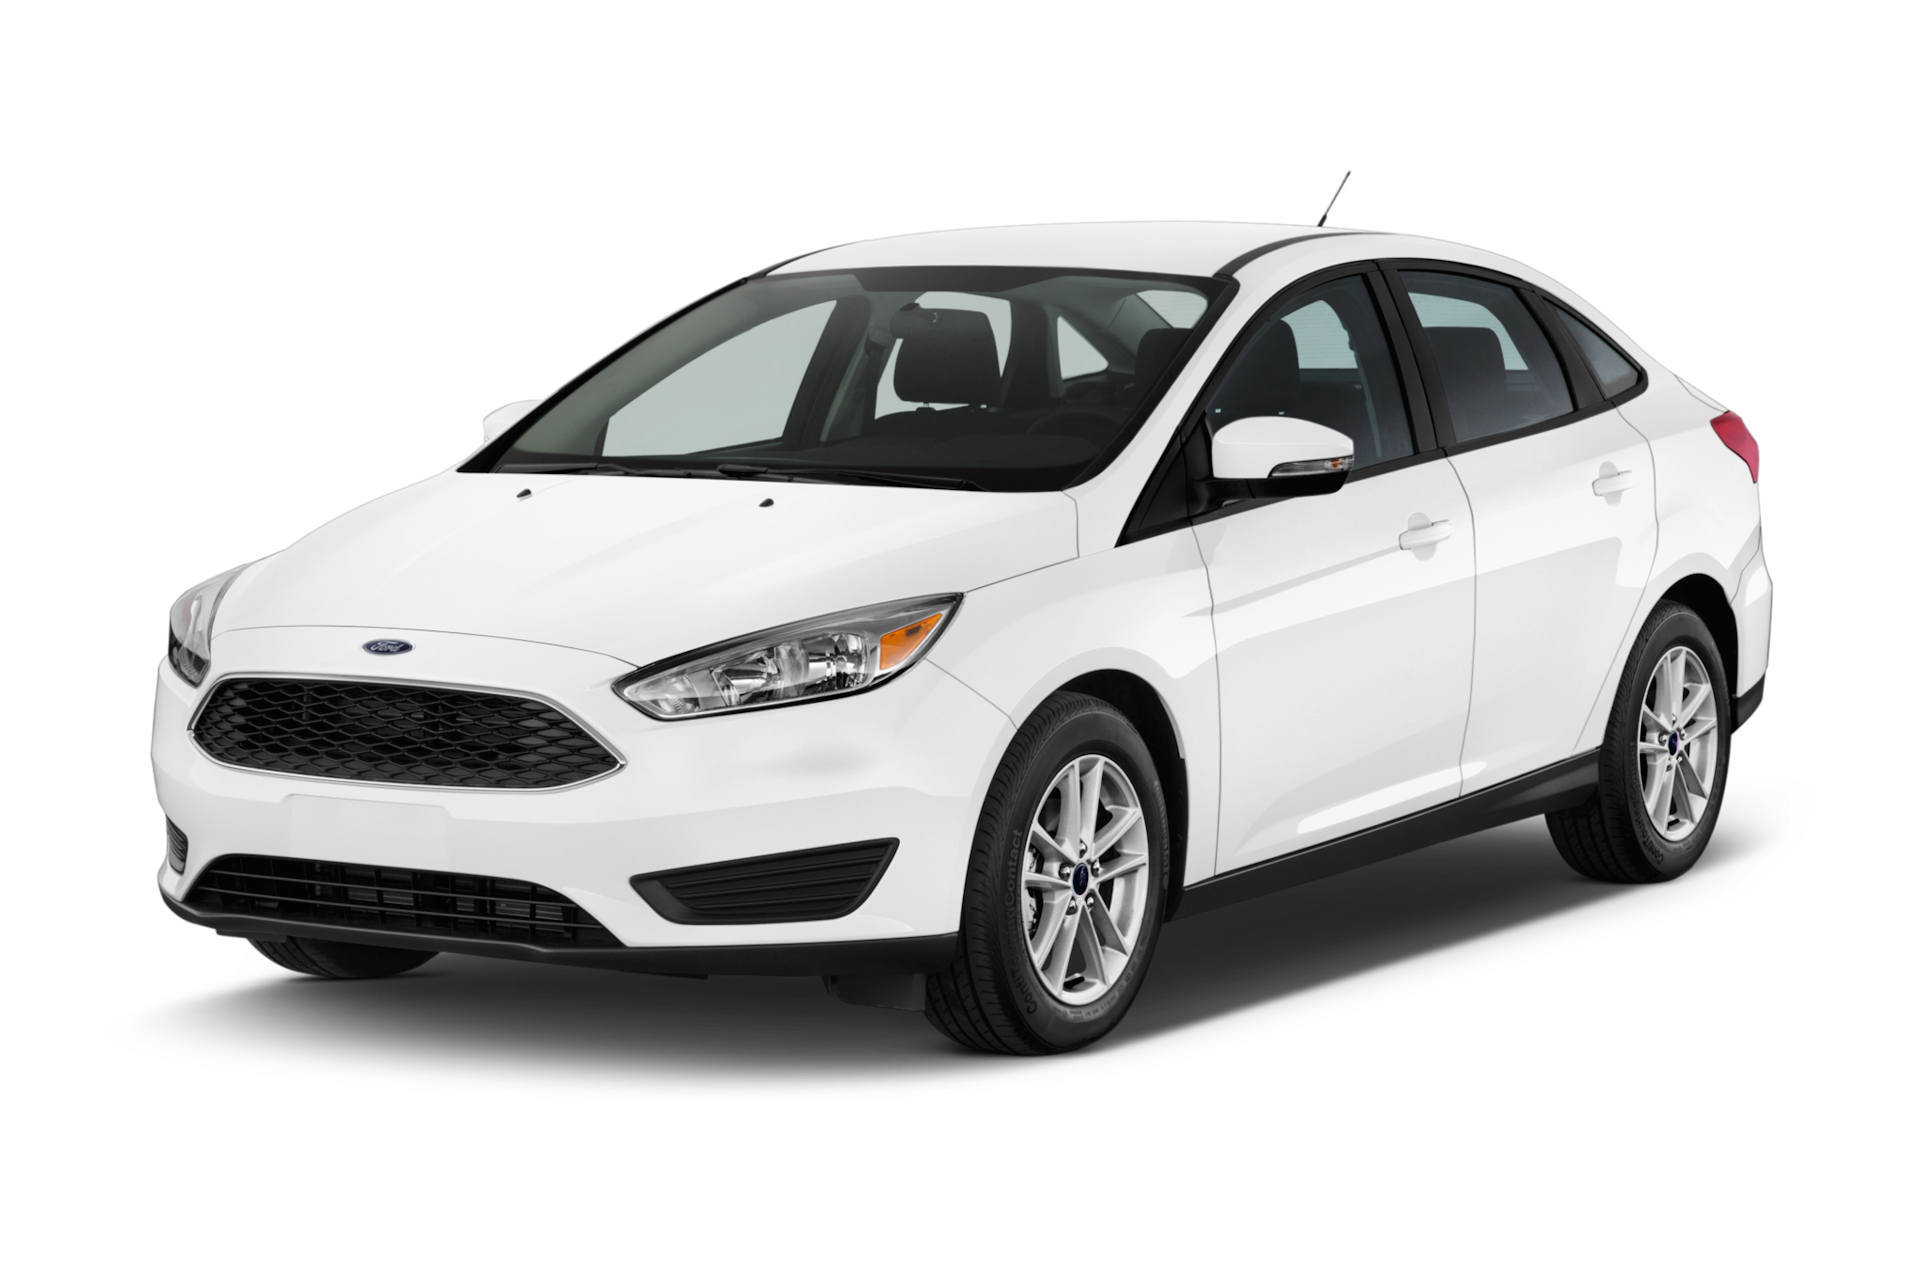 2018 Ford Focus Prices, Reviews, and Photos - MotorTrend